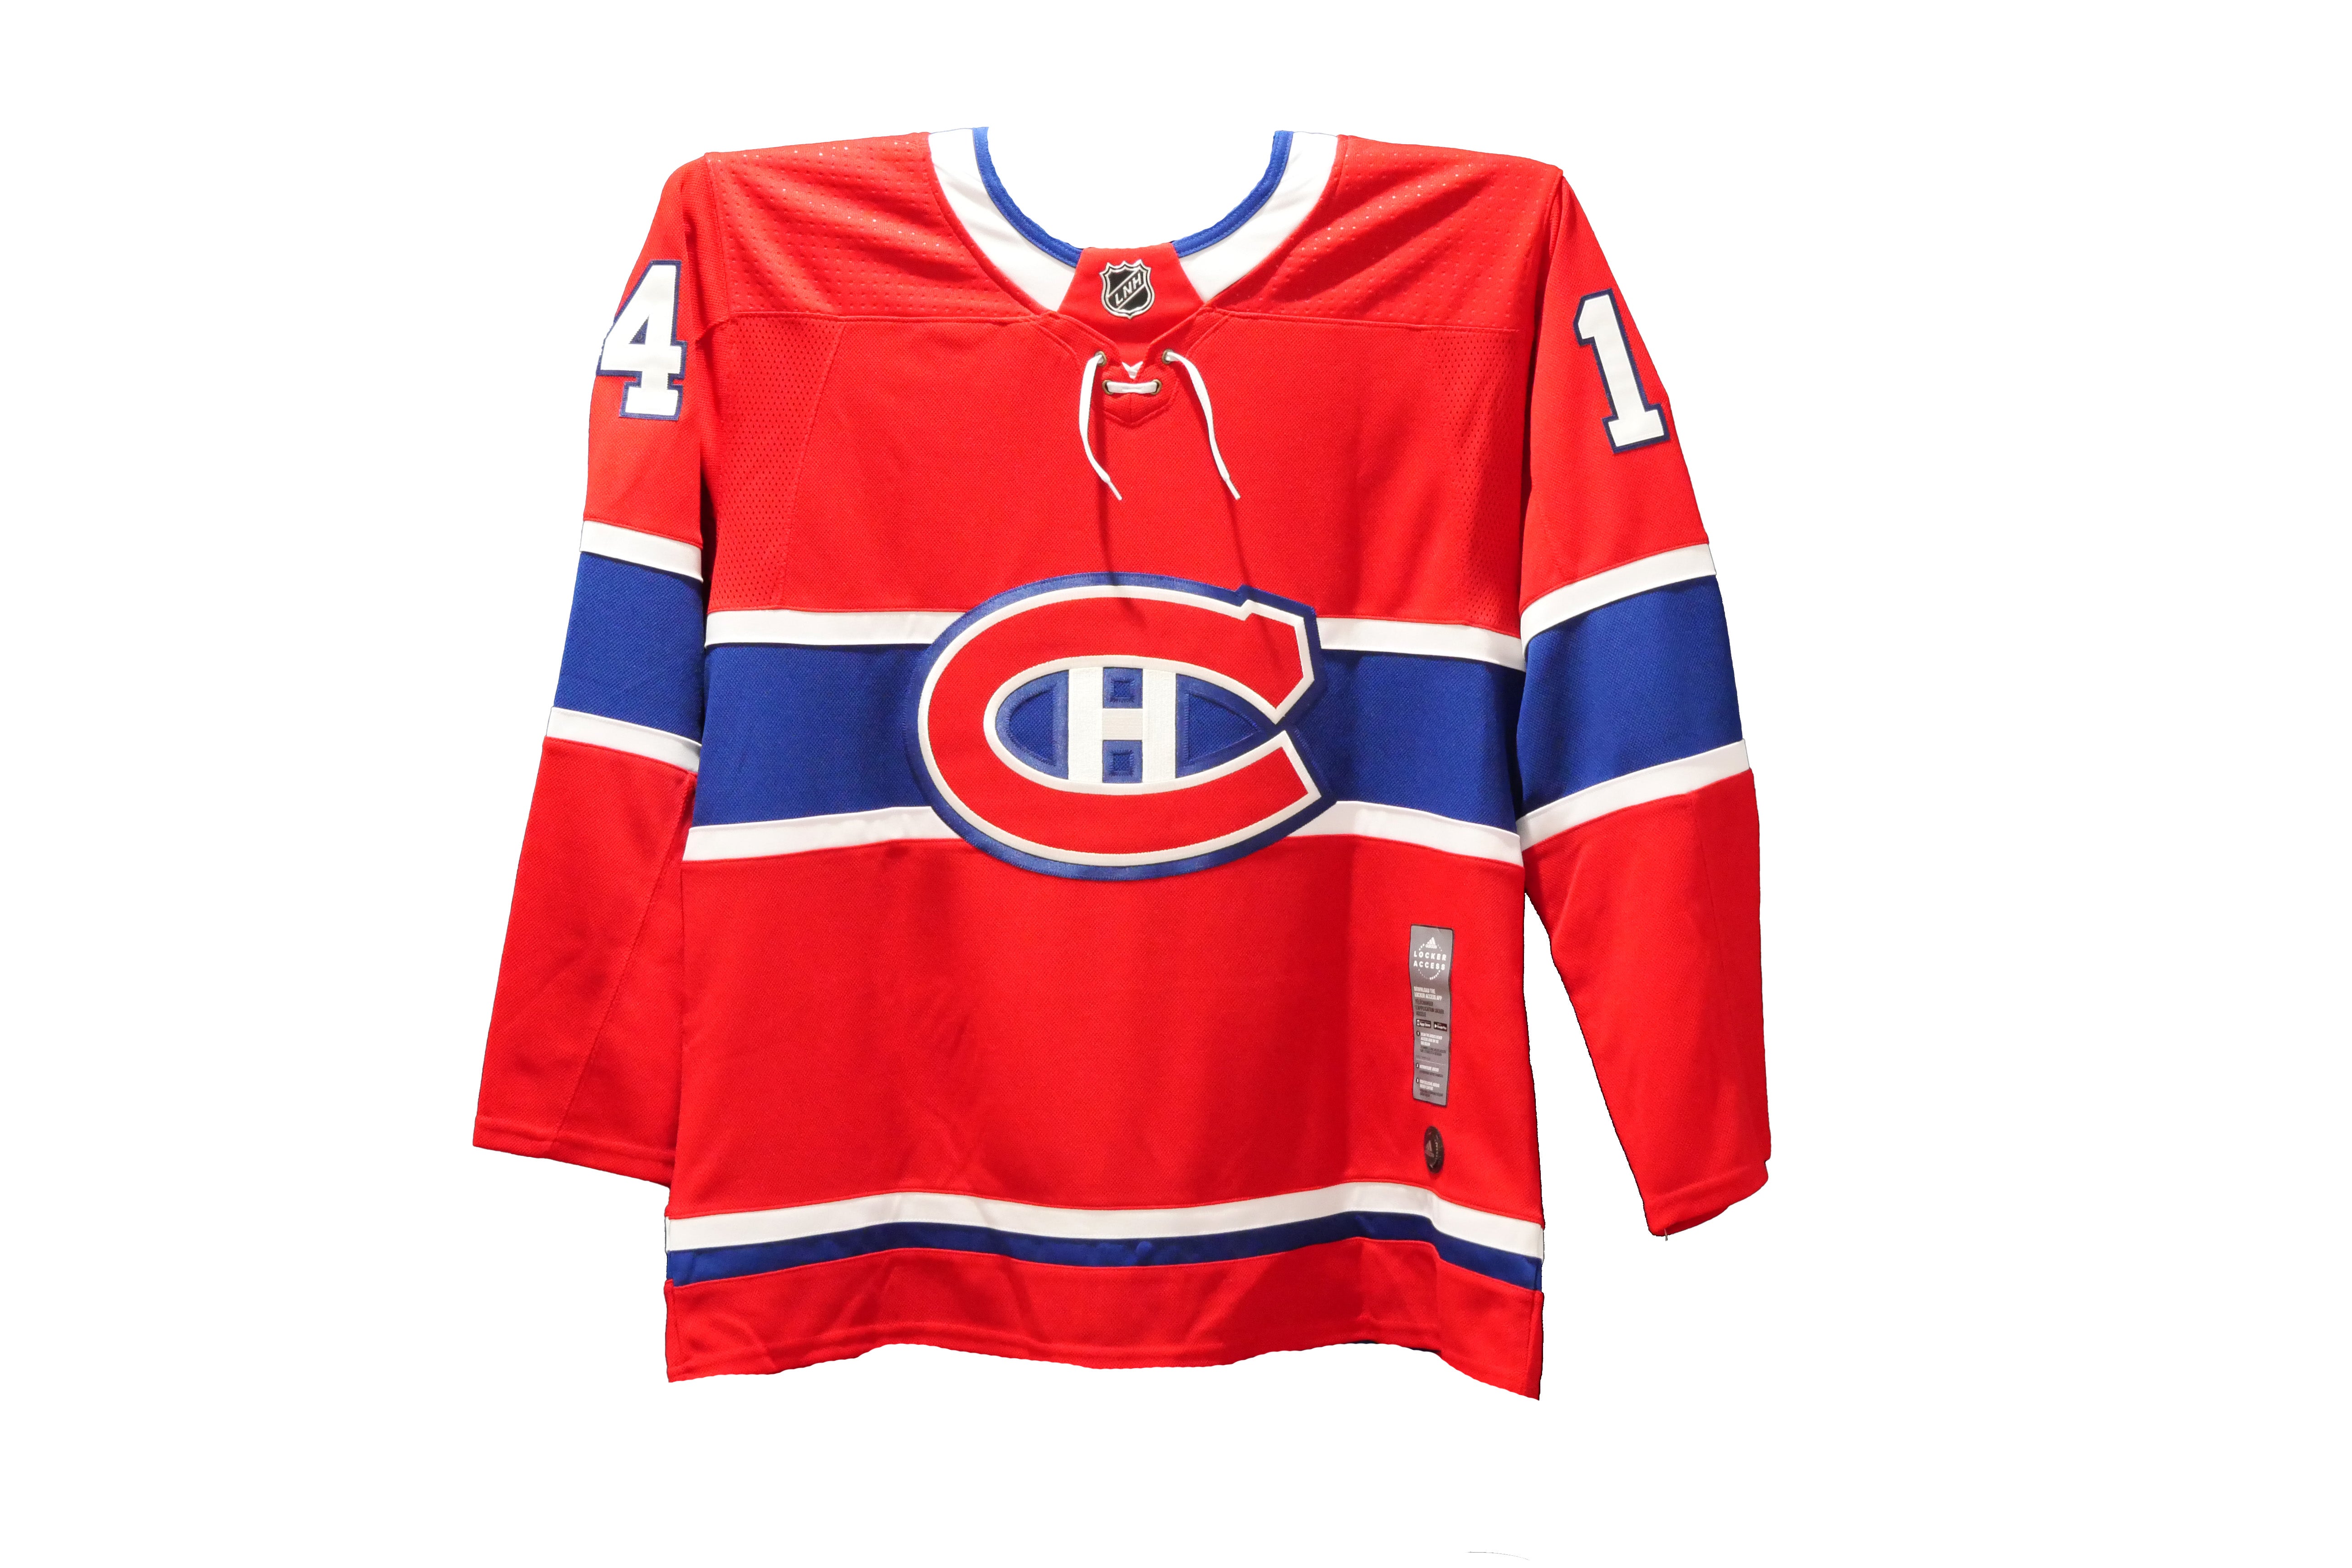 Nick Suzuki Authentic Autographed Montreal Canadiens Home Jersey